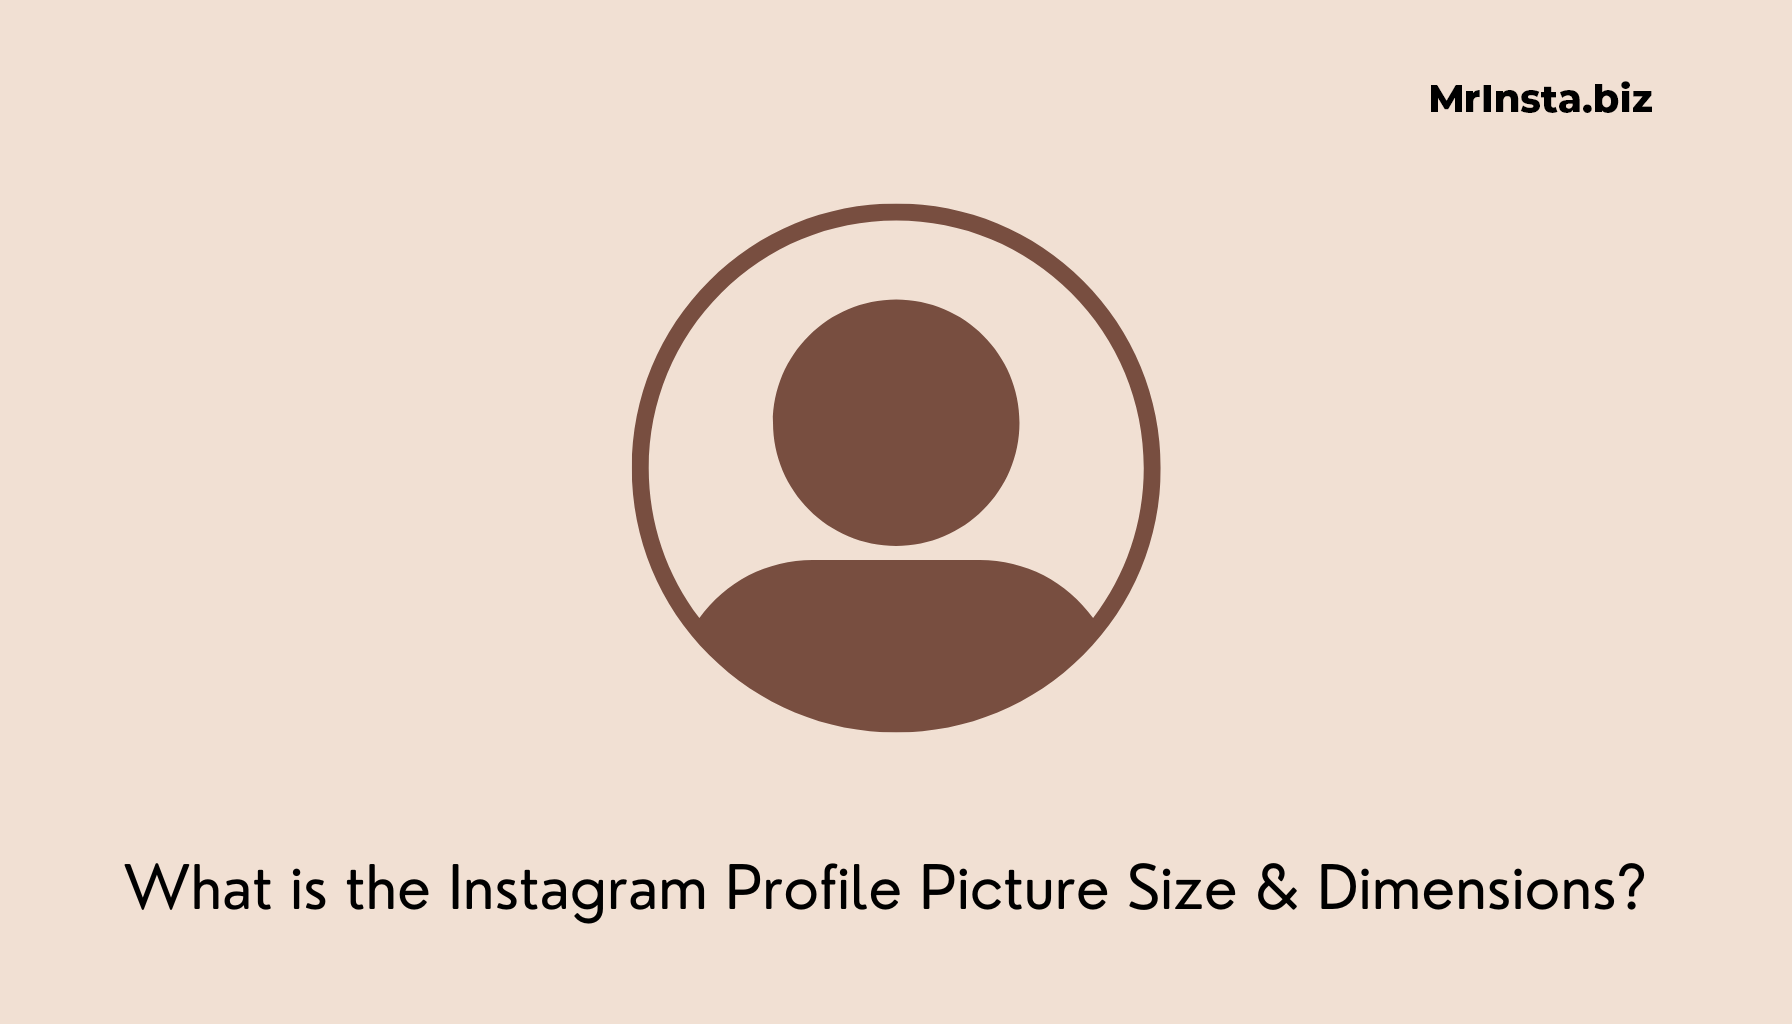 What is the Instagram Profile Picture Size & Dimensions?